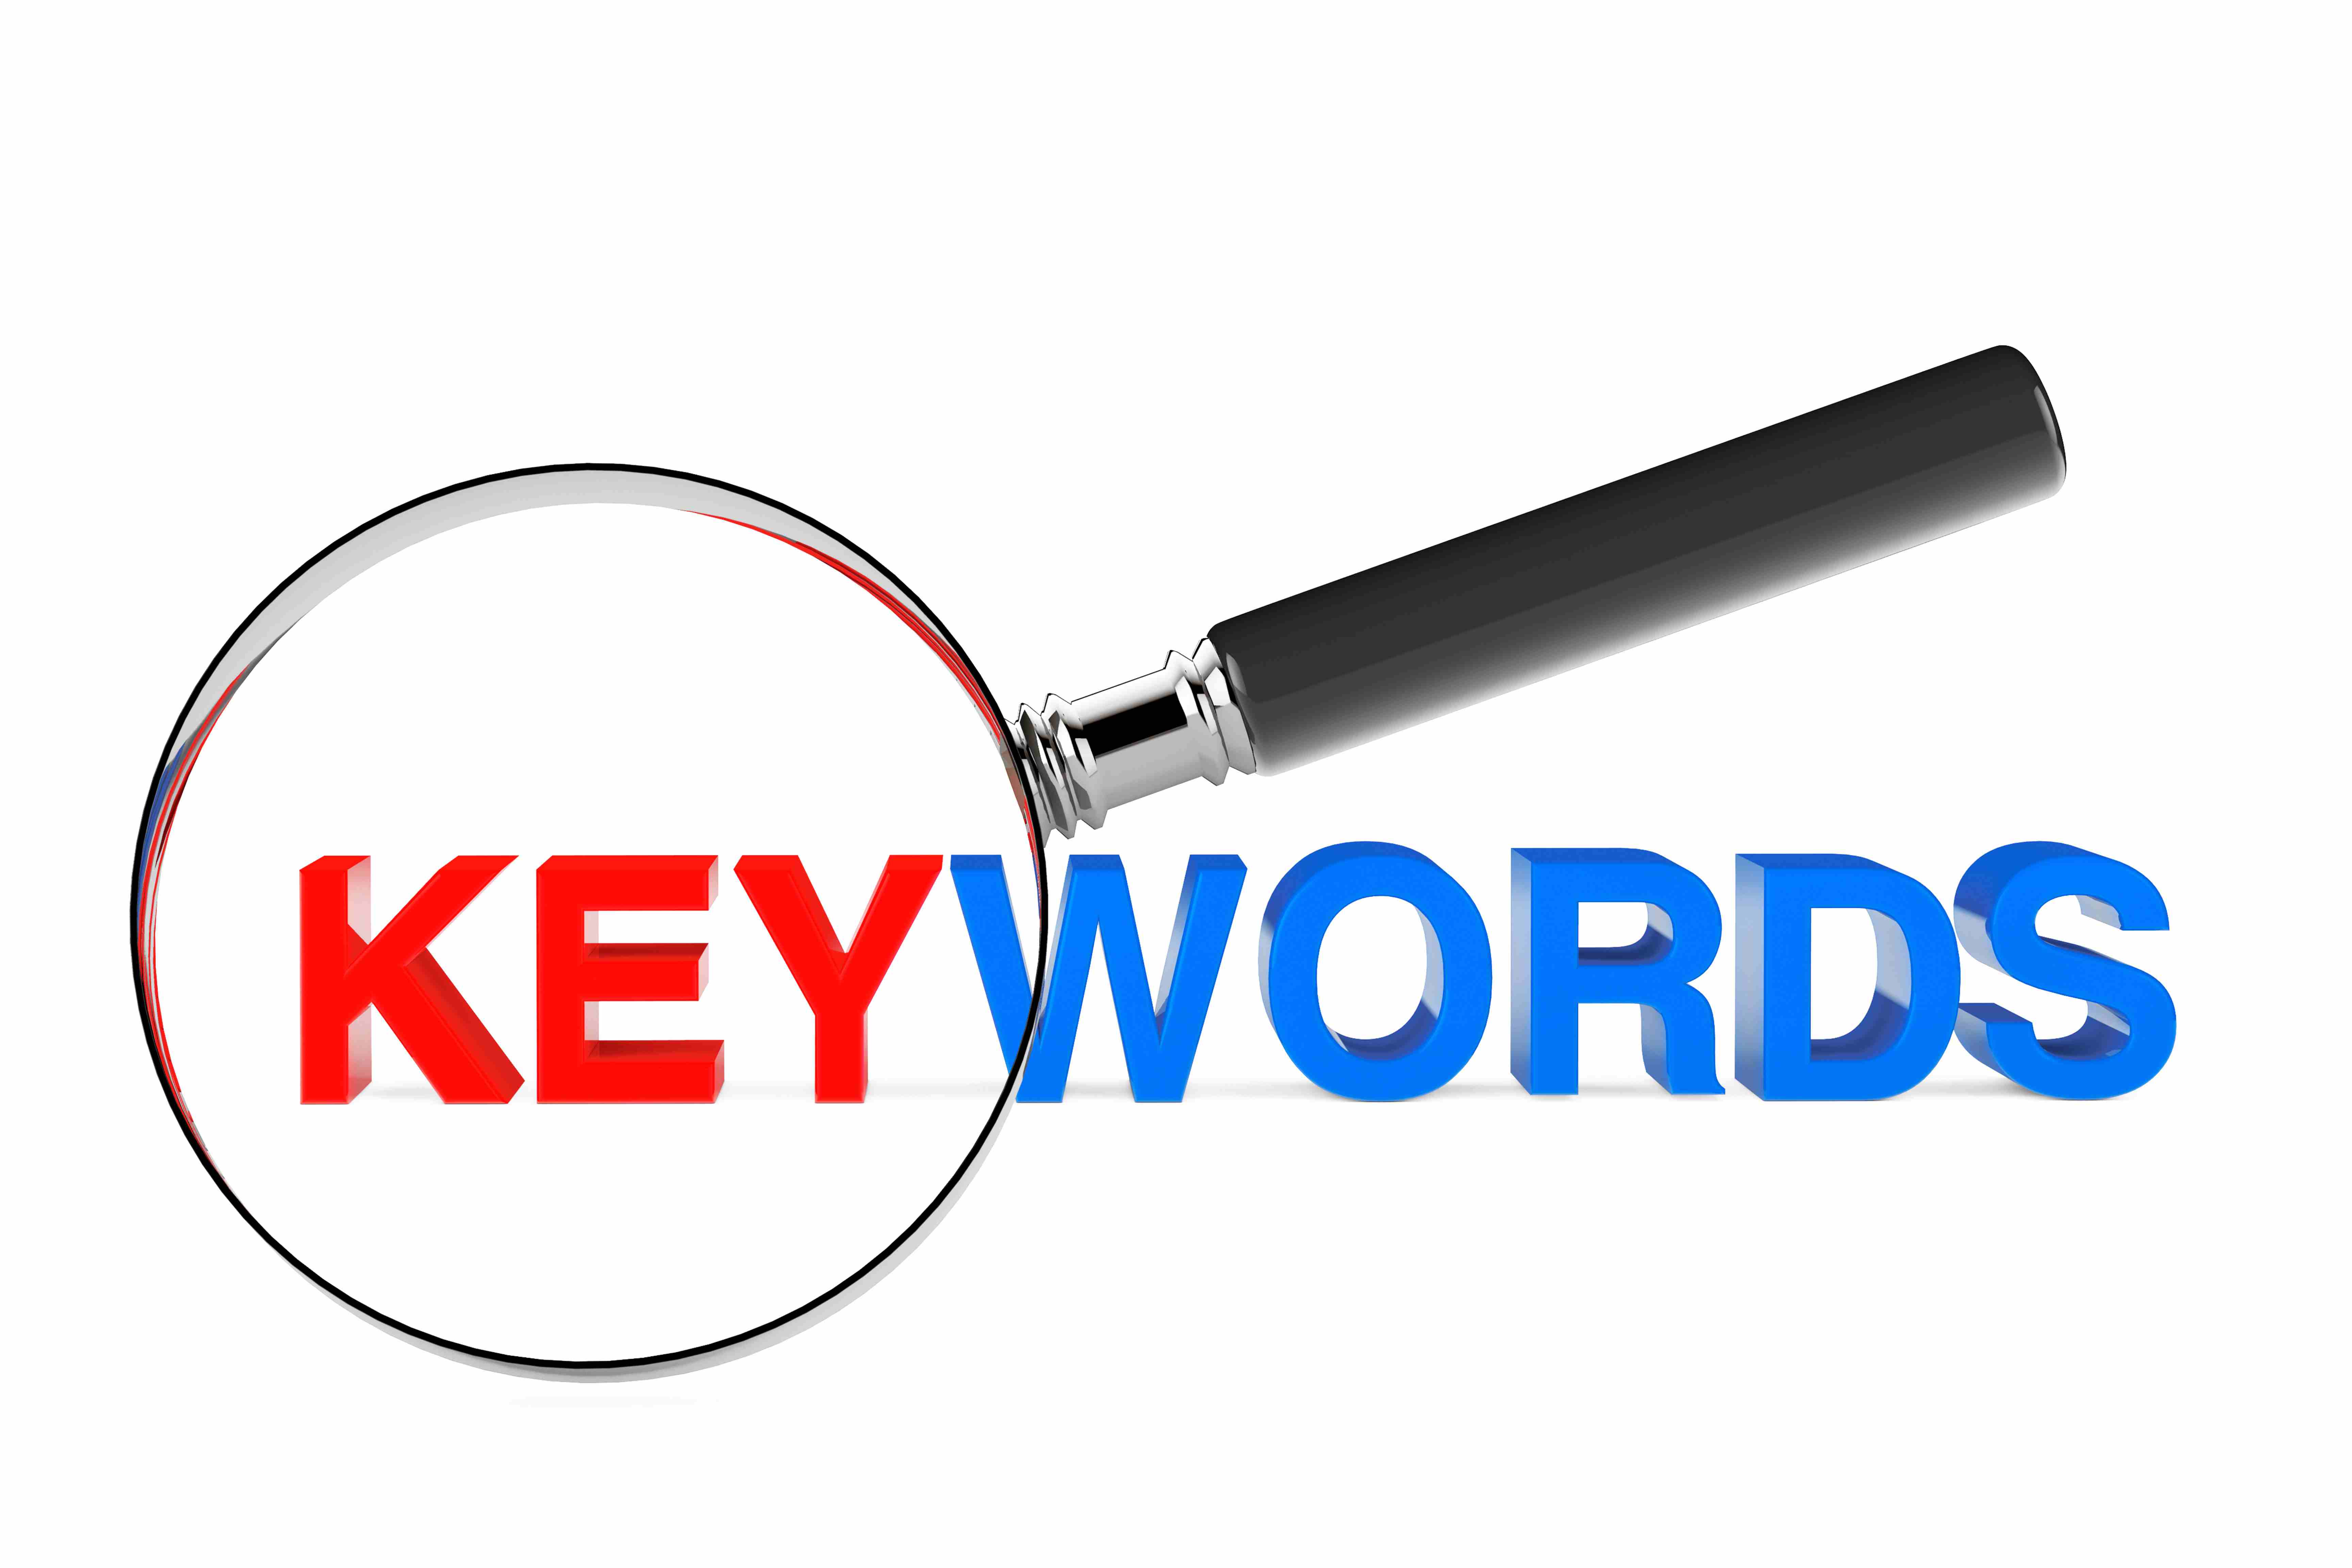 Keyword Research Tools: Finding the Best Keywords for Your Niche